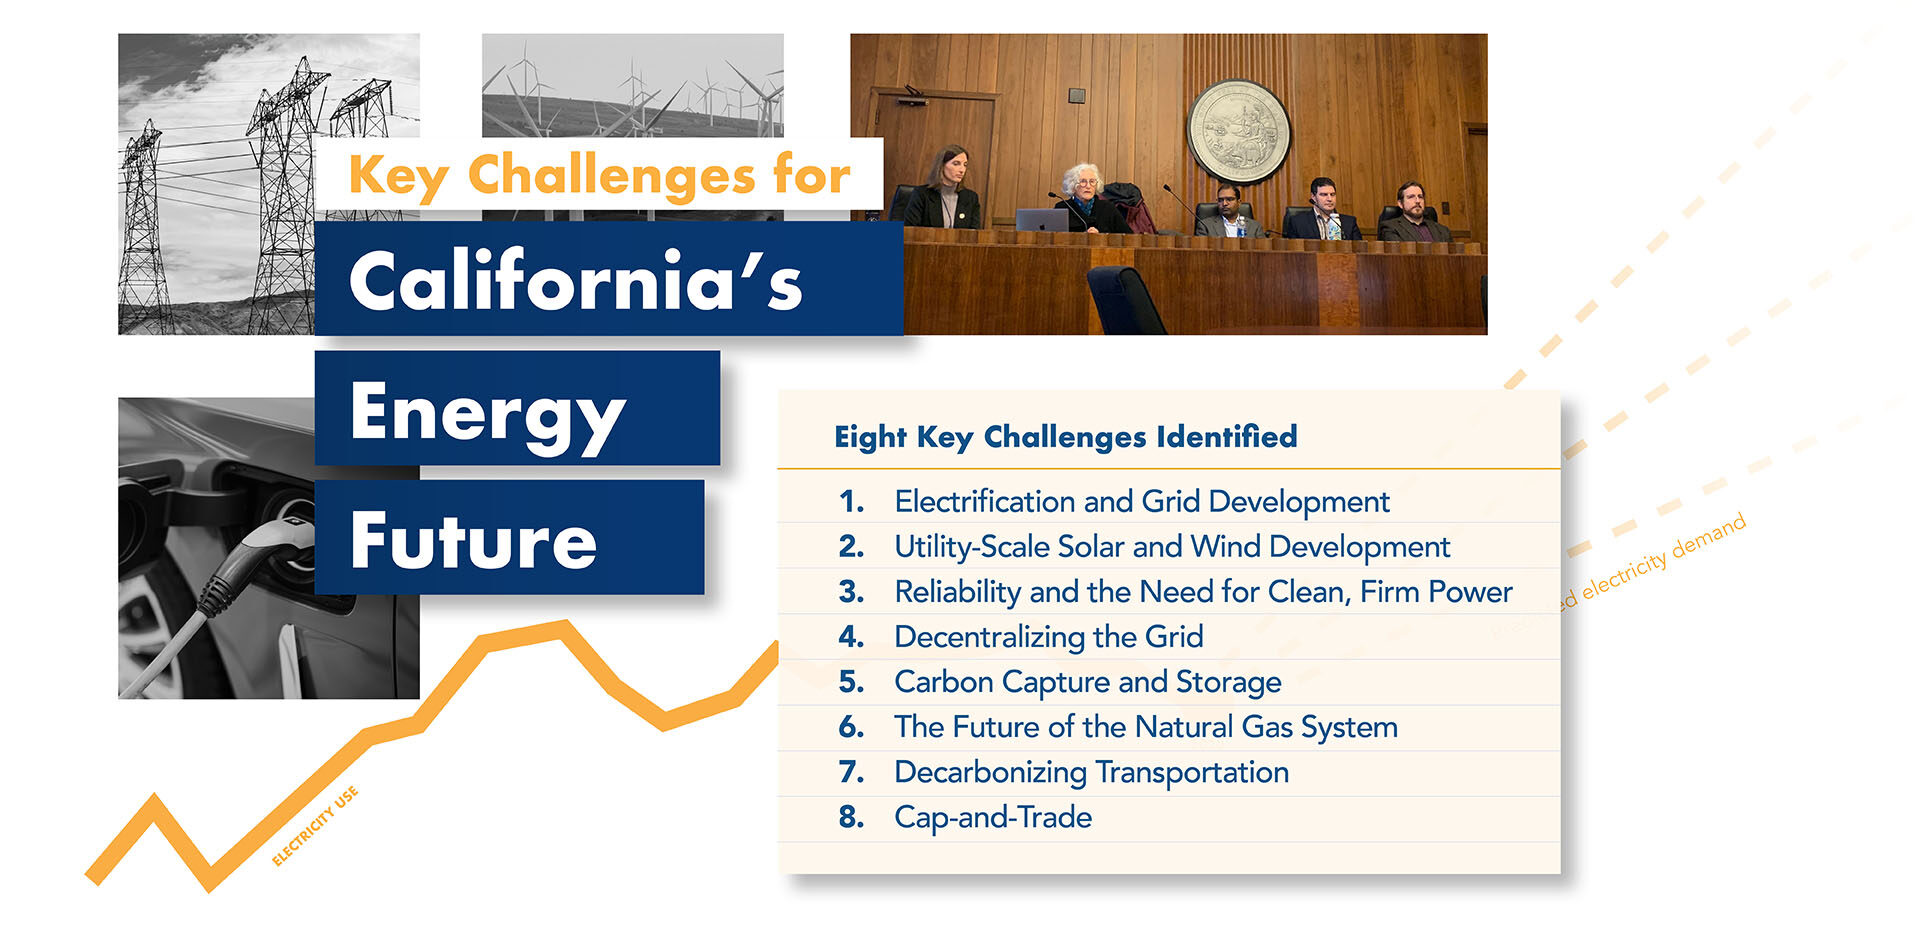 A graphic featuring a background grid of photos with transmission lines, an EV charger, and wind turbines, as well as a photo of the steering committee and lead author sitting at a Committee dais, with text overlaid and a list of the 8 key challenges identified: Electrification and Grid Development, Utility-Scale Solar and Wind Development, Reliability and the Need for Clean, Firm Power, Decentralizing the Grid, Carbon Capture and Storage, The Future of the Natural Gas System, Decarbonizing Transportation, and Cap-and-Trade.